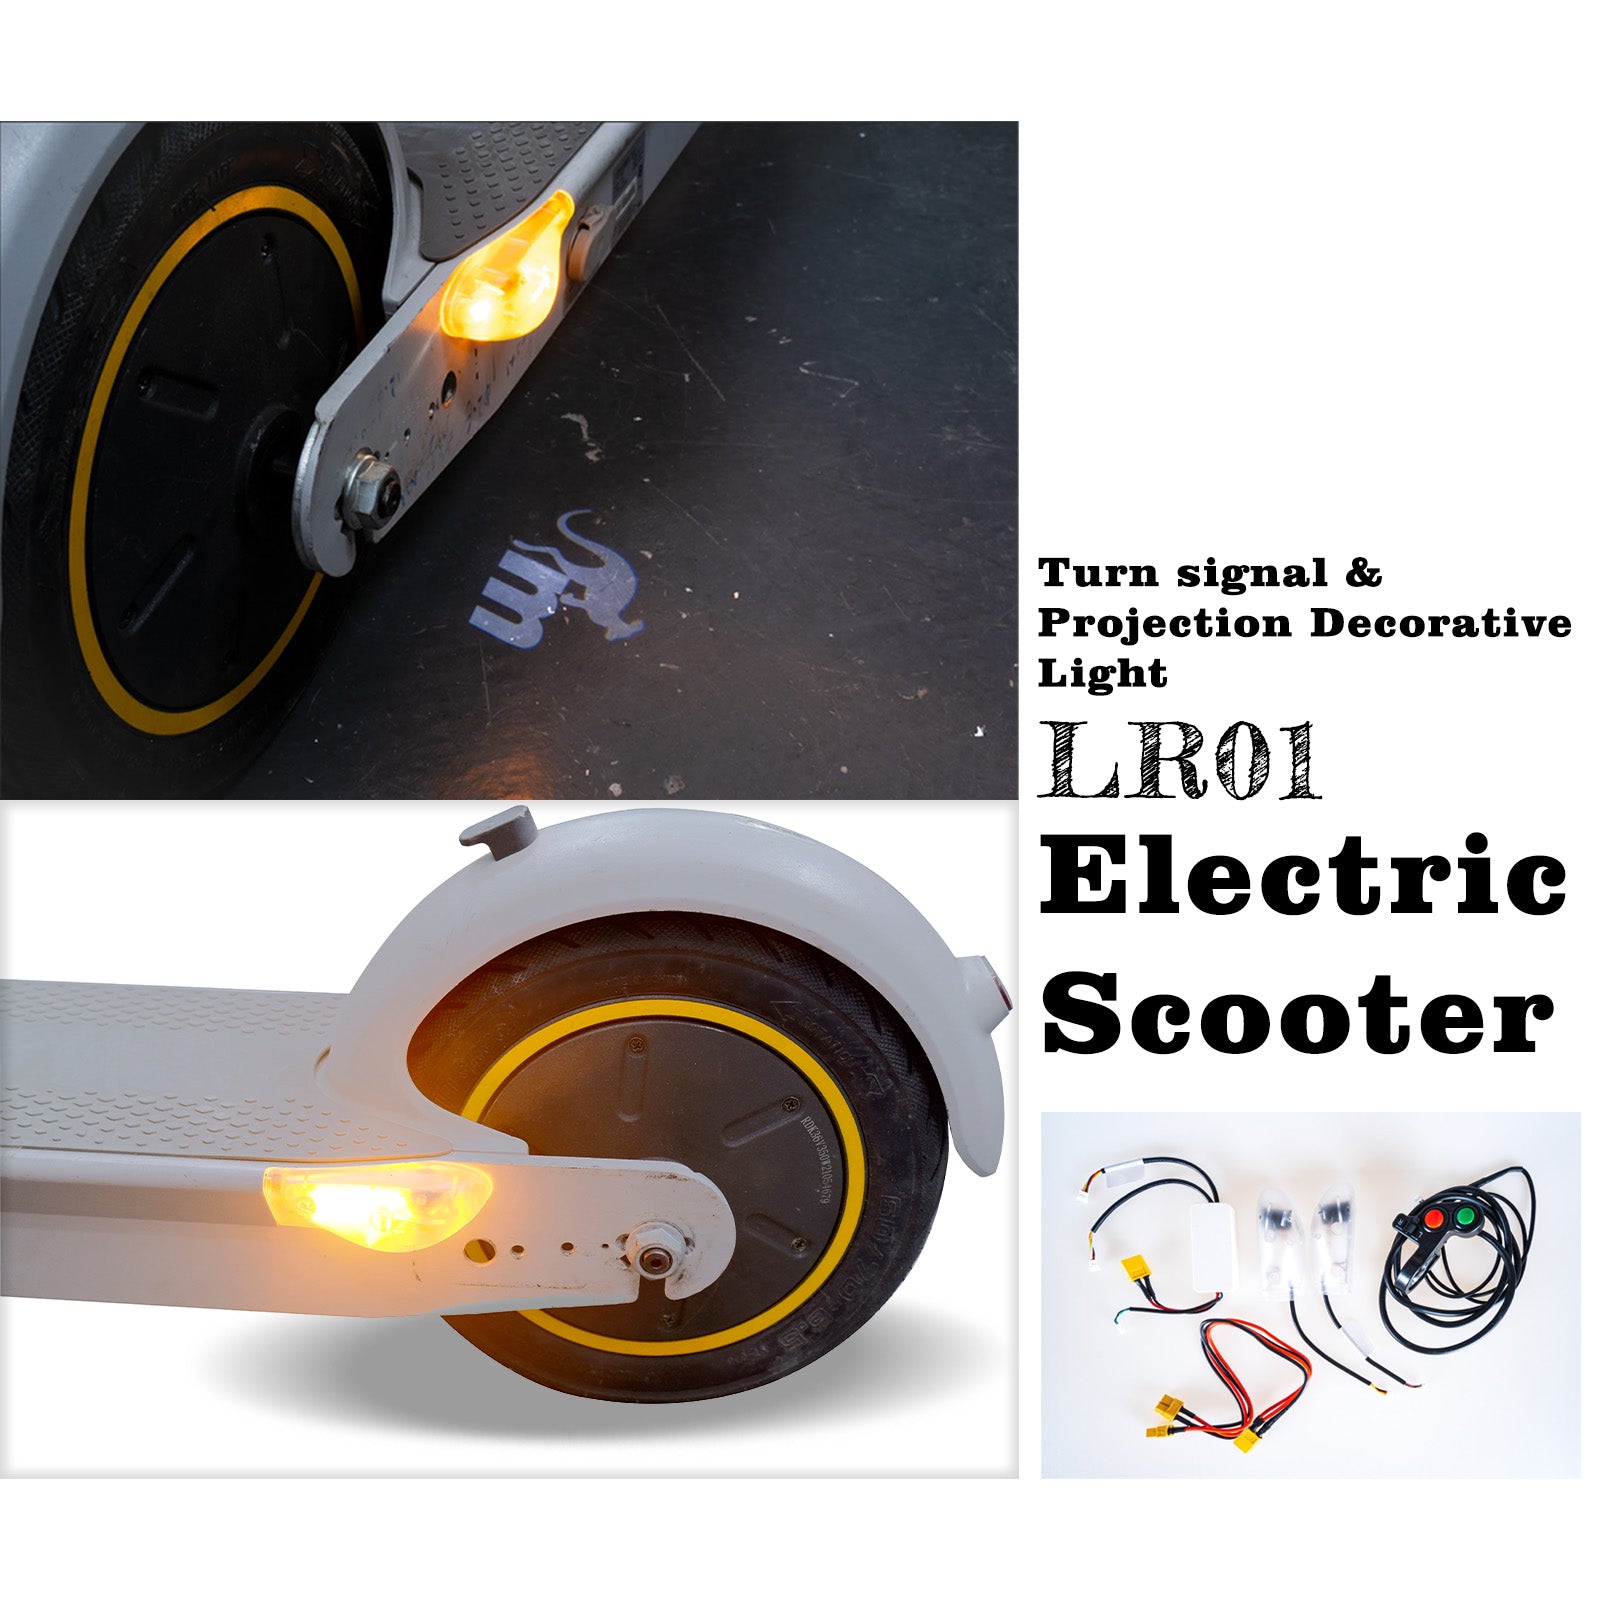 Ninebot by Segway turn signals, turn signals for electric scooter